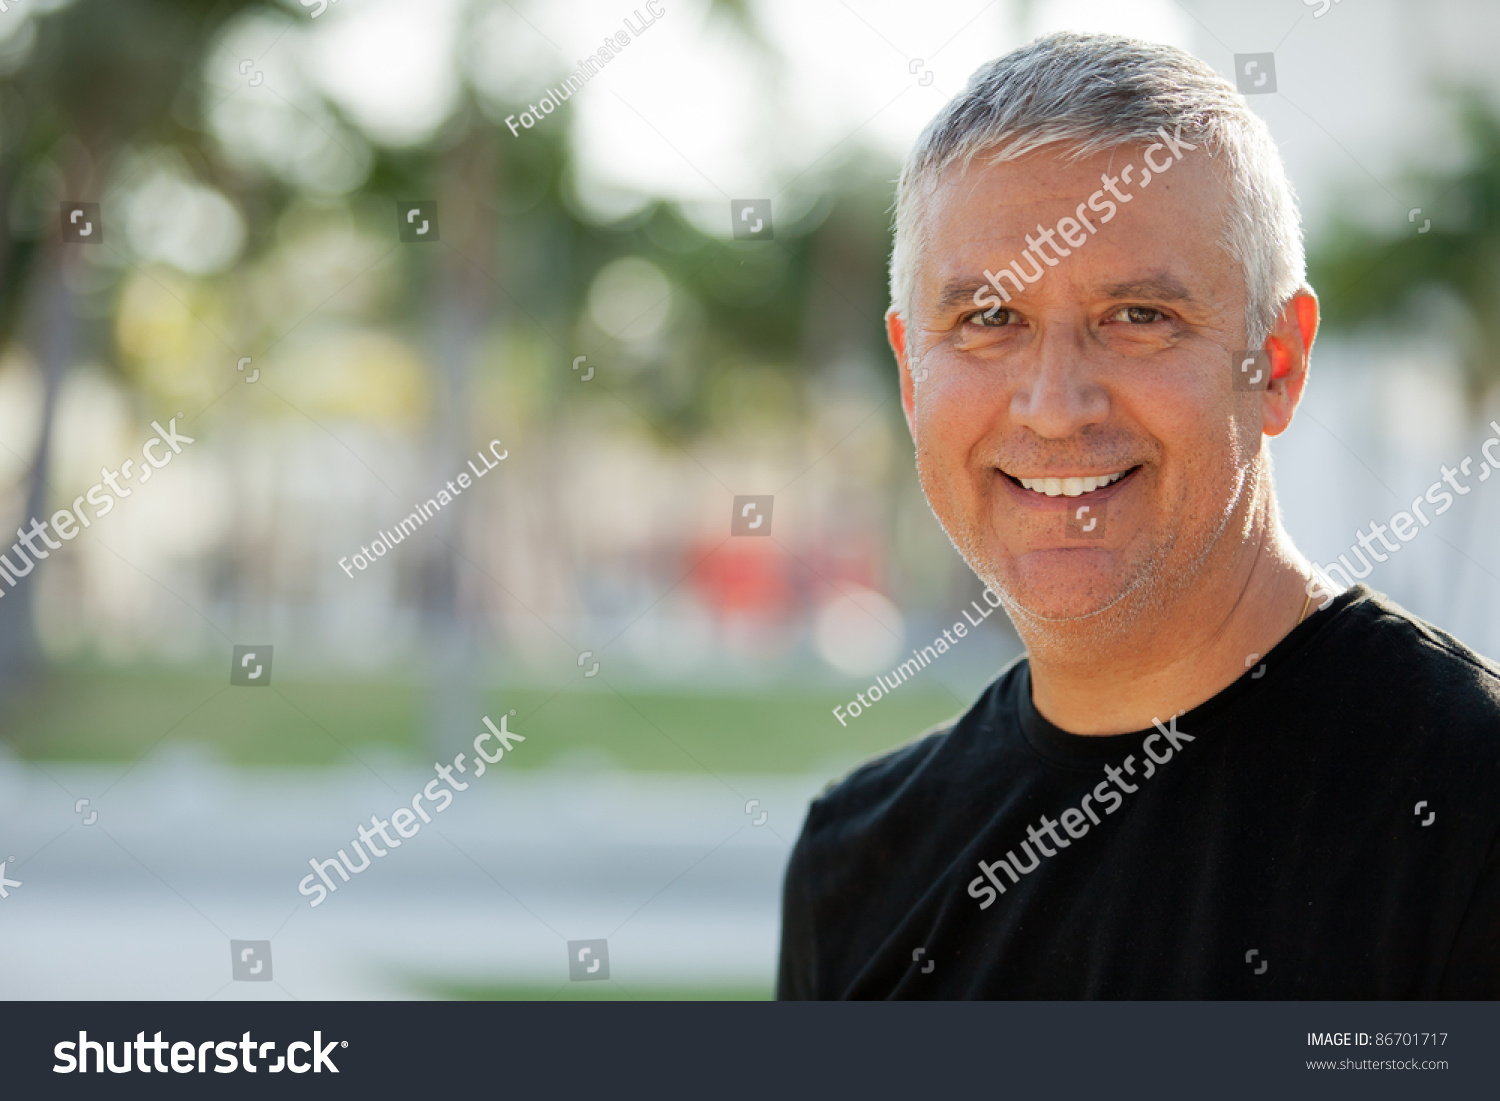 Handsome unshaven middle age man in an outdoor setting. #86701717